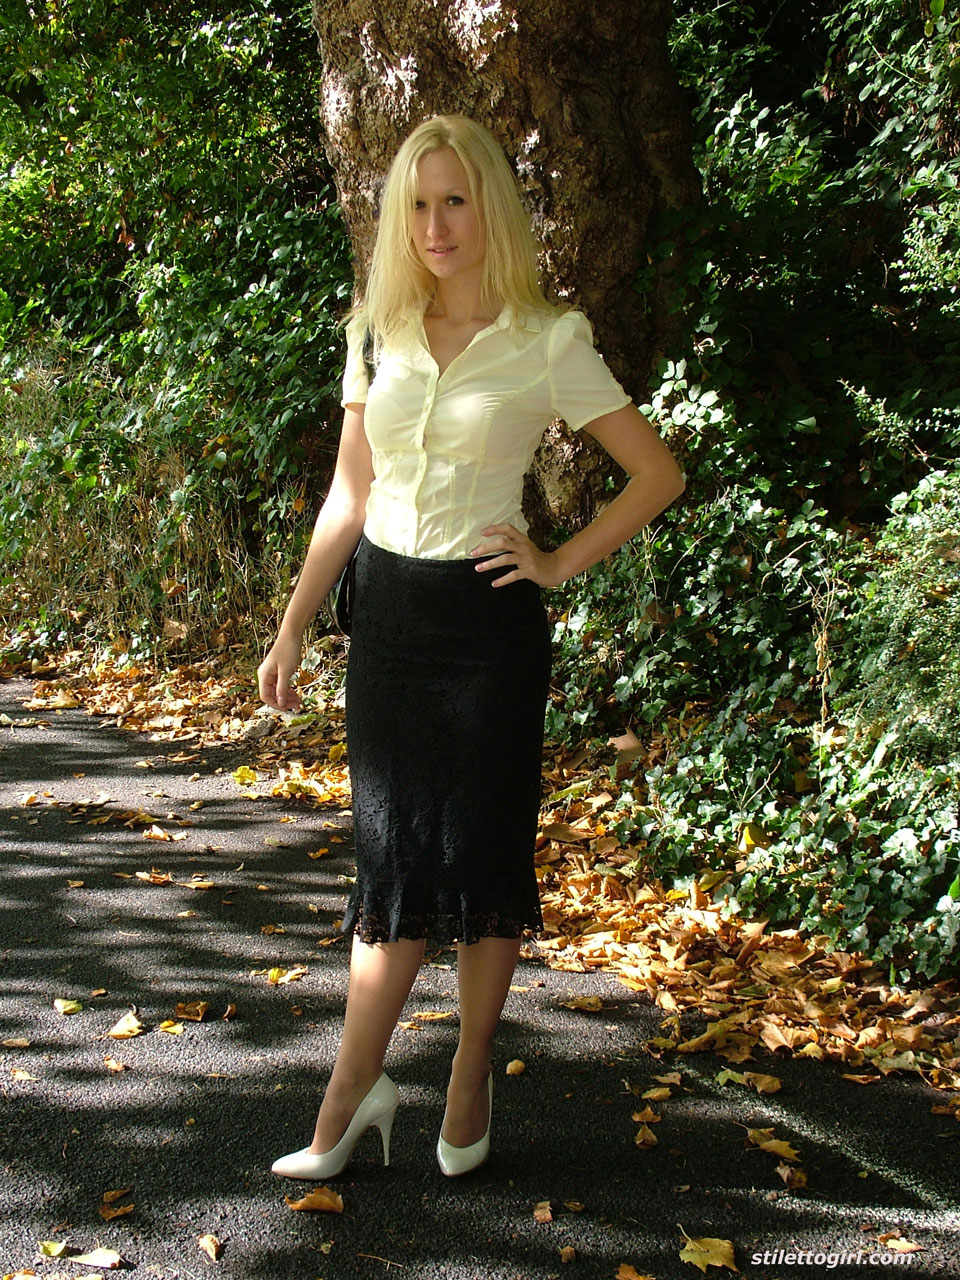 clothed blonde iona shows off her white stilettos in a long skirt by a park